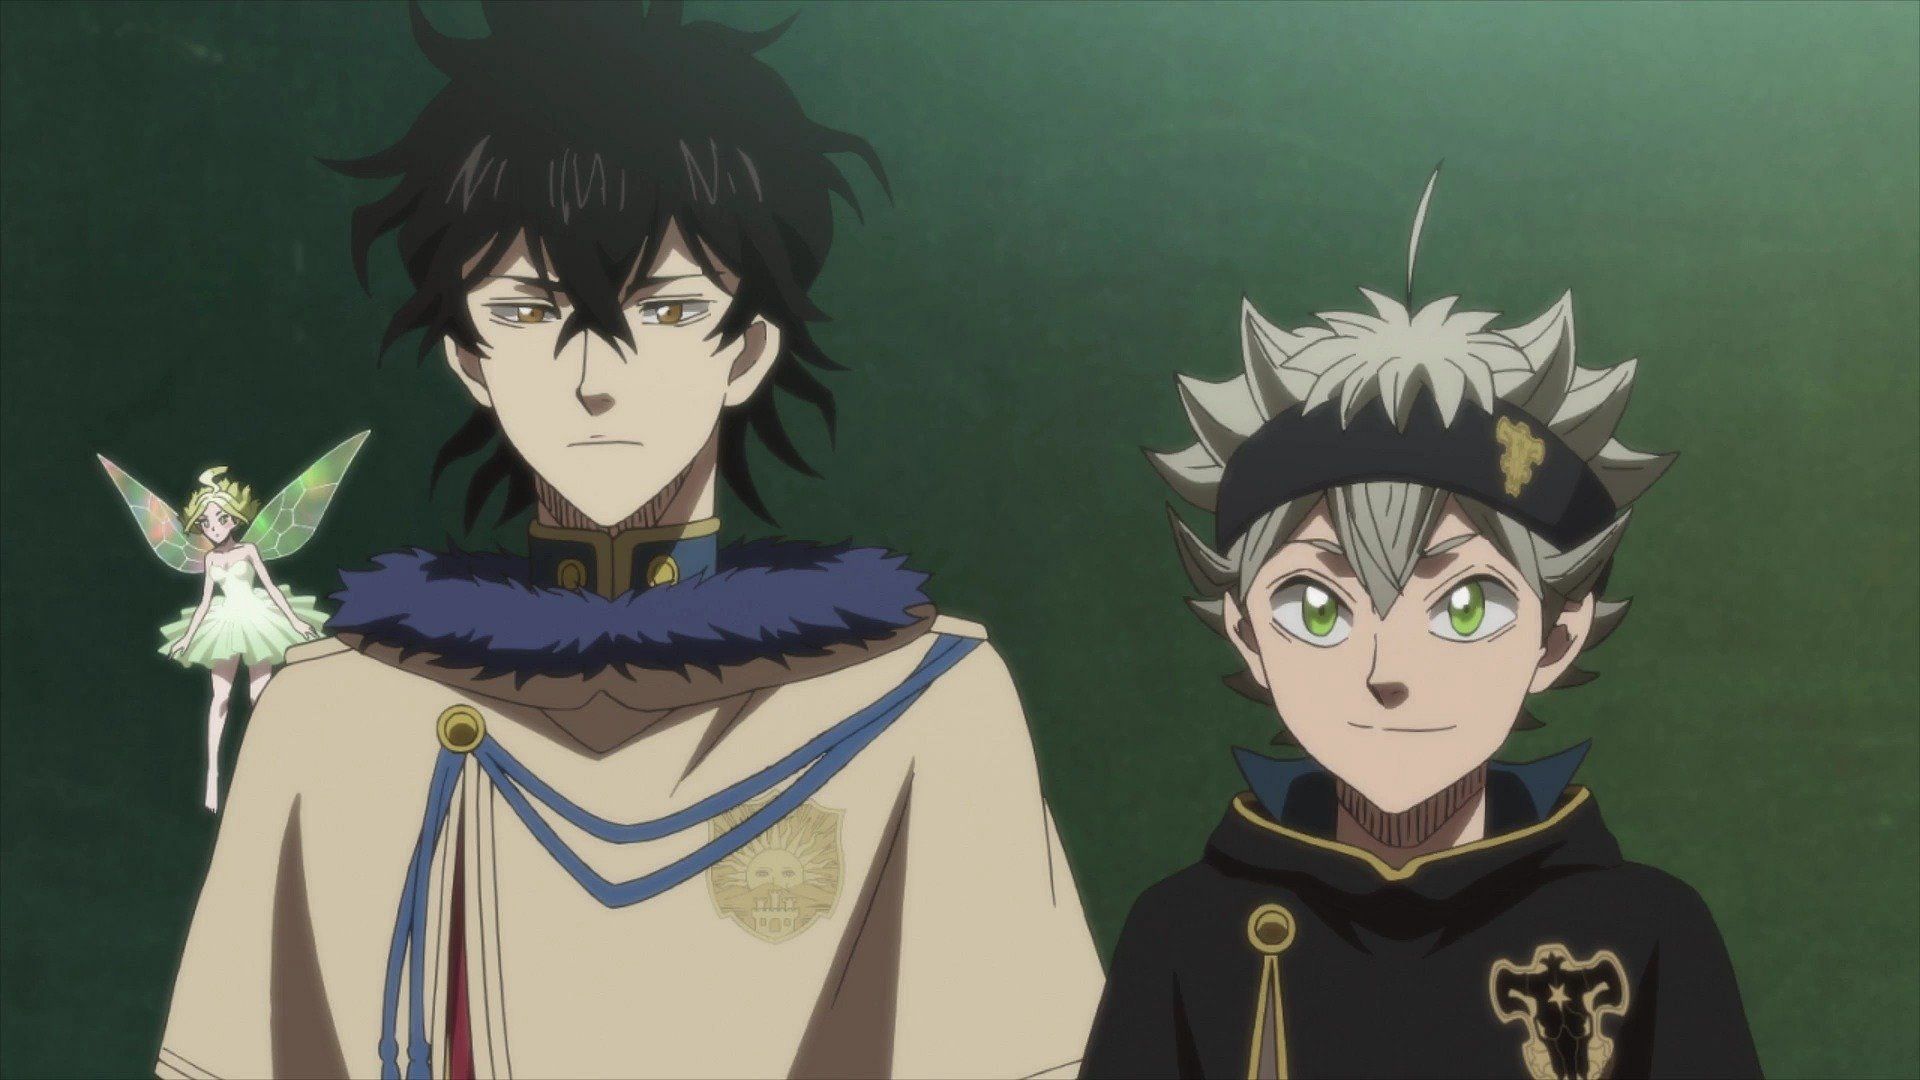 Fans can expect major announcements with the voices of Yuno and Asta set to appear at Jump Festa 2023 (Image via Studio Pierrot)